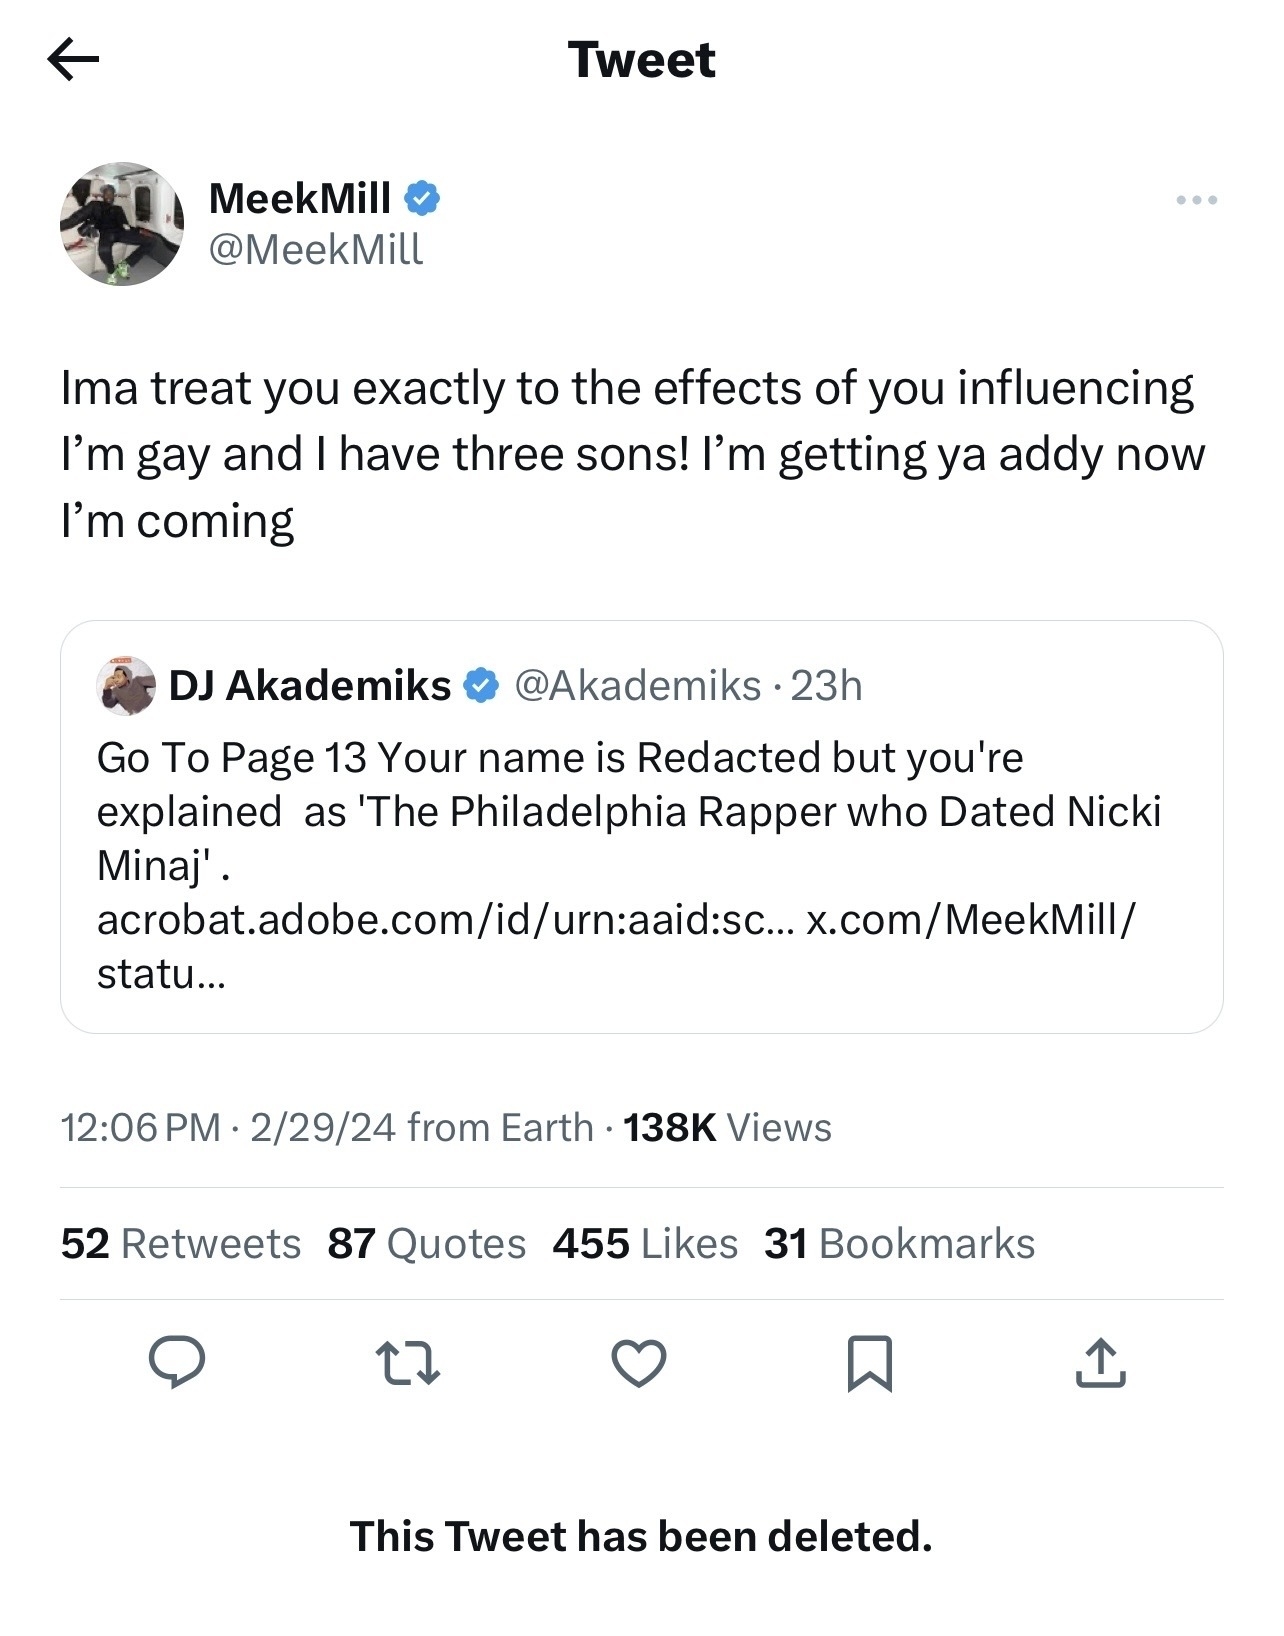 A screenshot of a tweet from Meek Mill joking about his sexual orientation and children, with a reply from DJ Akademiks. The tweet has been deleted